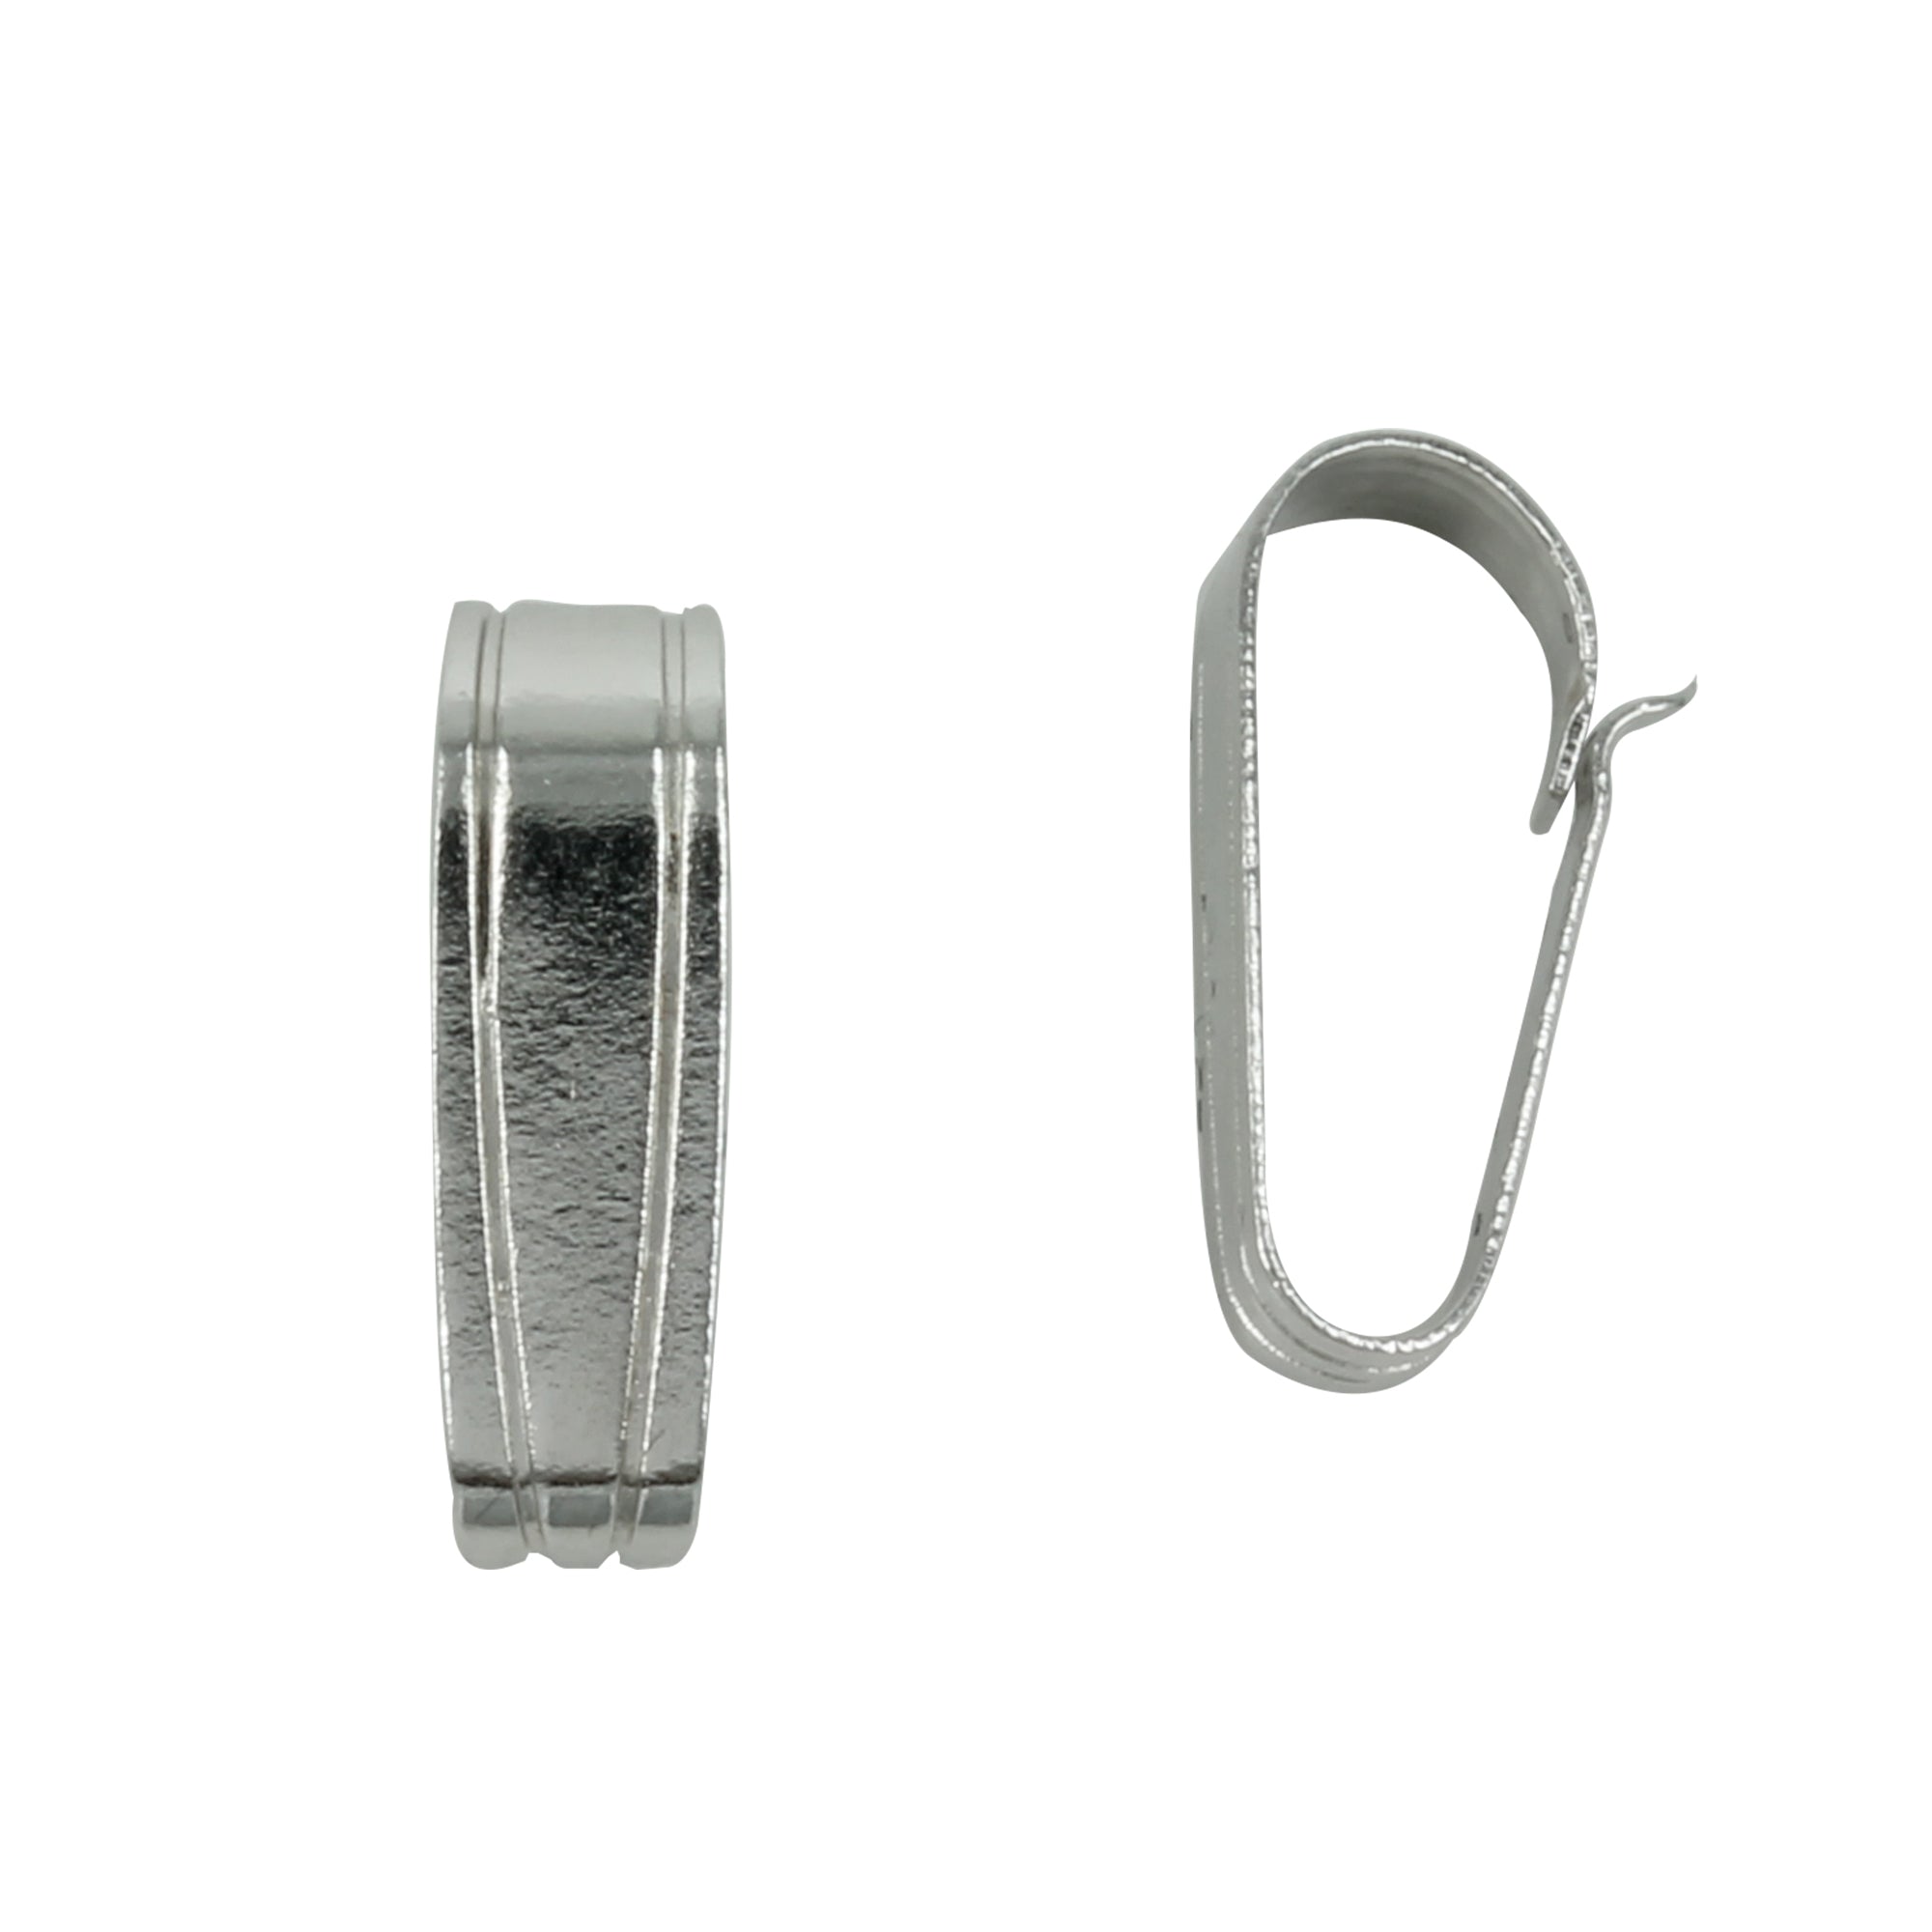 Snap-on Bail in Sterling Silver and Rhodium plated 14mm tall 14x4mm